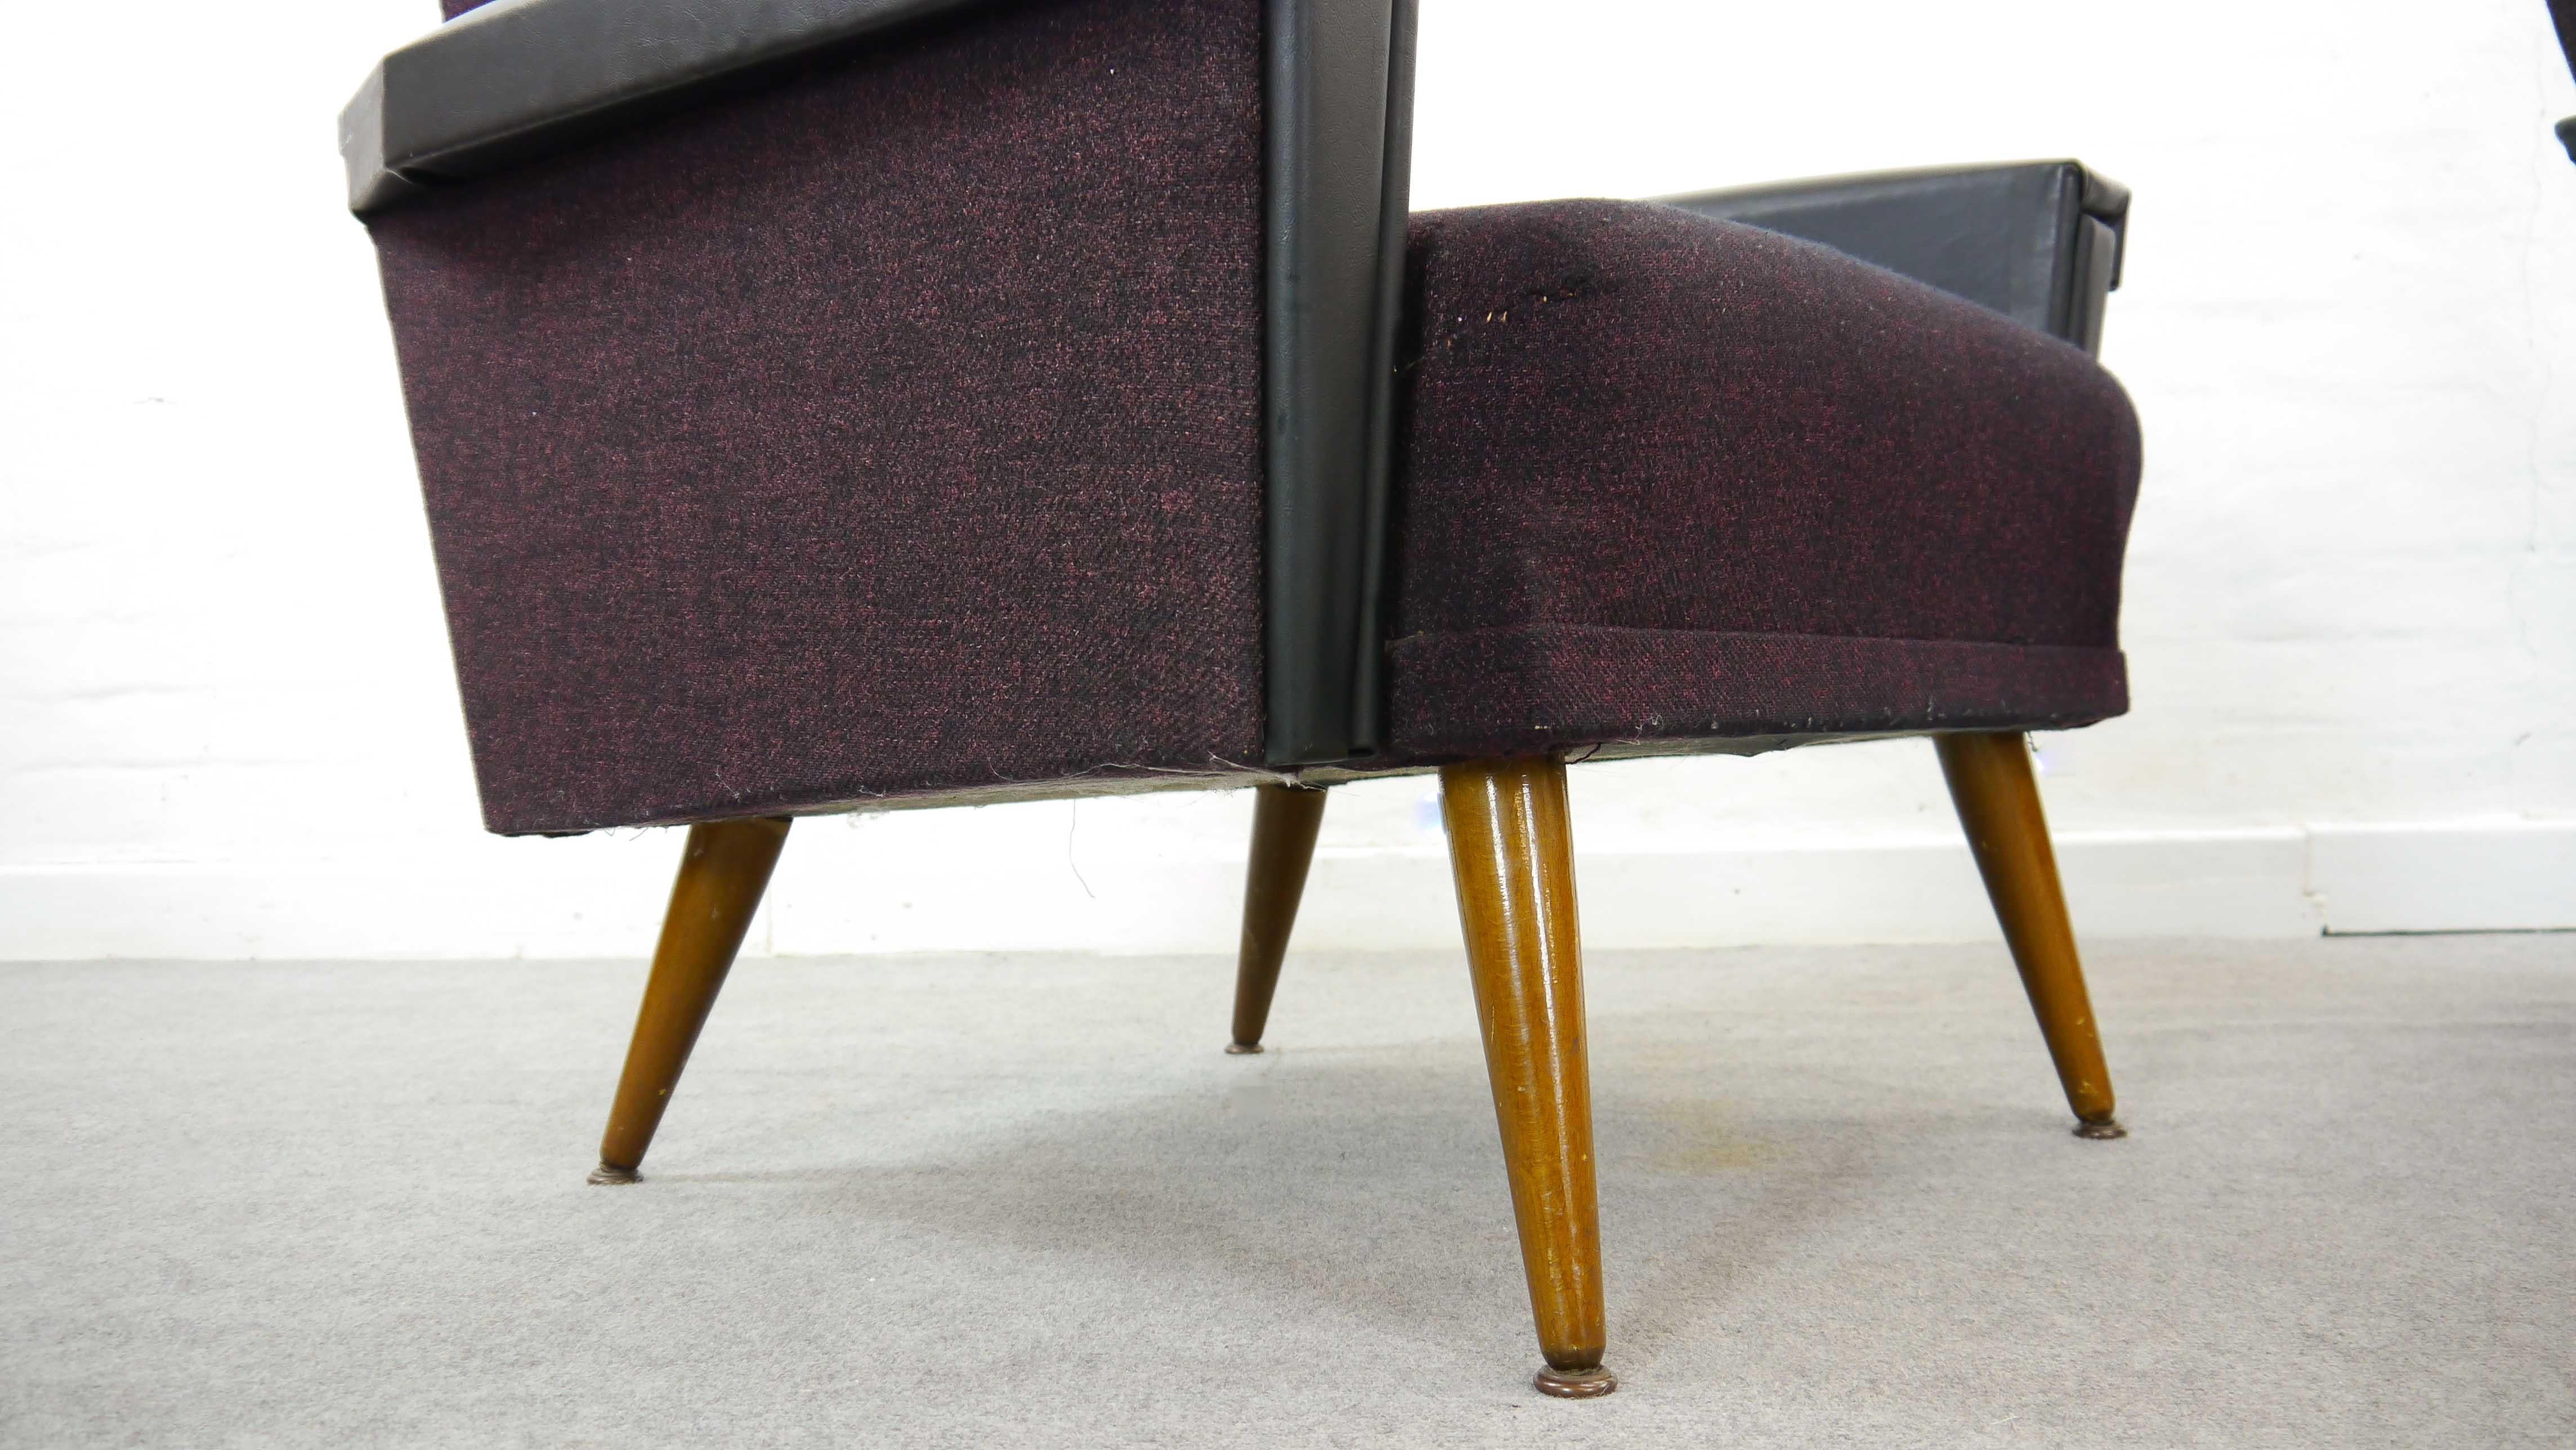 Vintage Pair of Midcentury Cocktail Chairs or Club Chairs in Purple-Black, 1950s For Sale 1